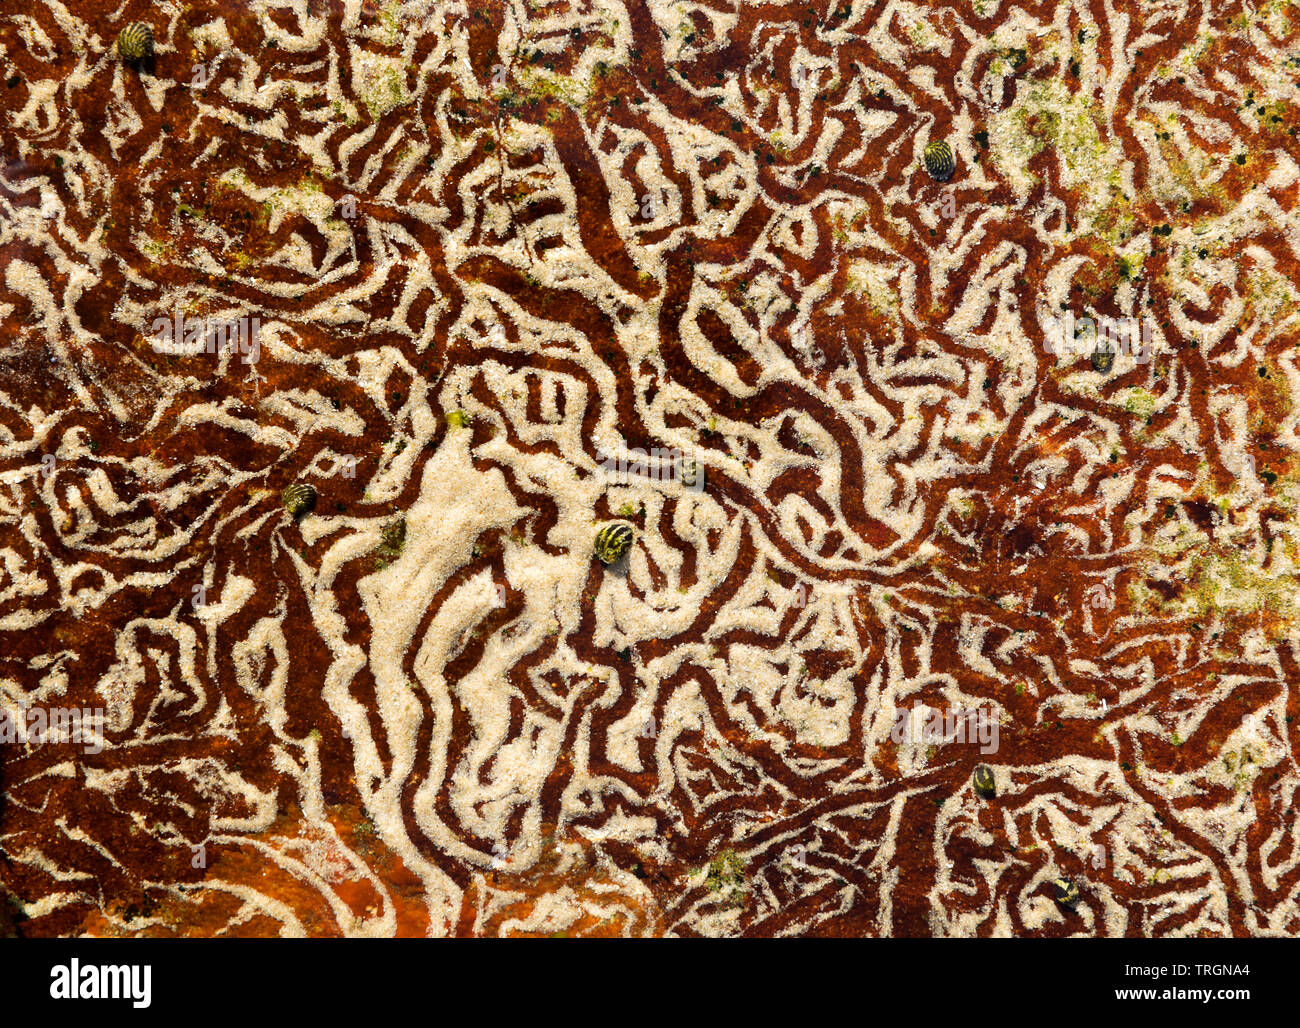 Australia, NSW, Yamba, tidal pool with abstract designs created by snails moving on sand Stock Photo